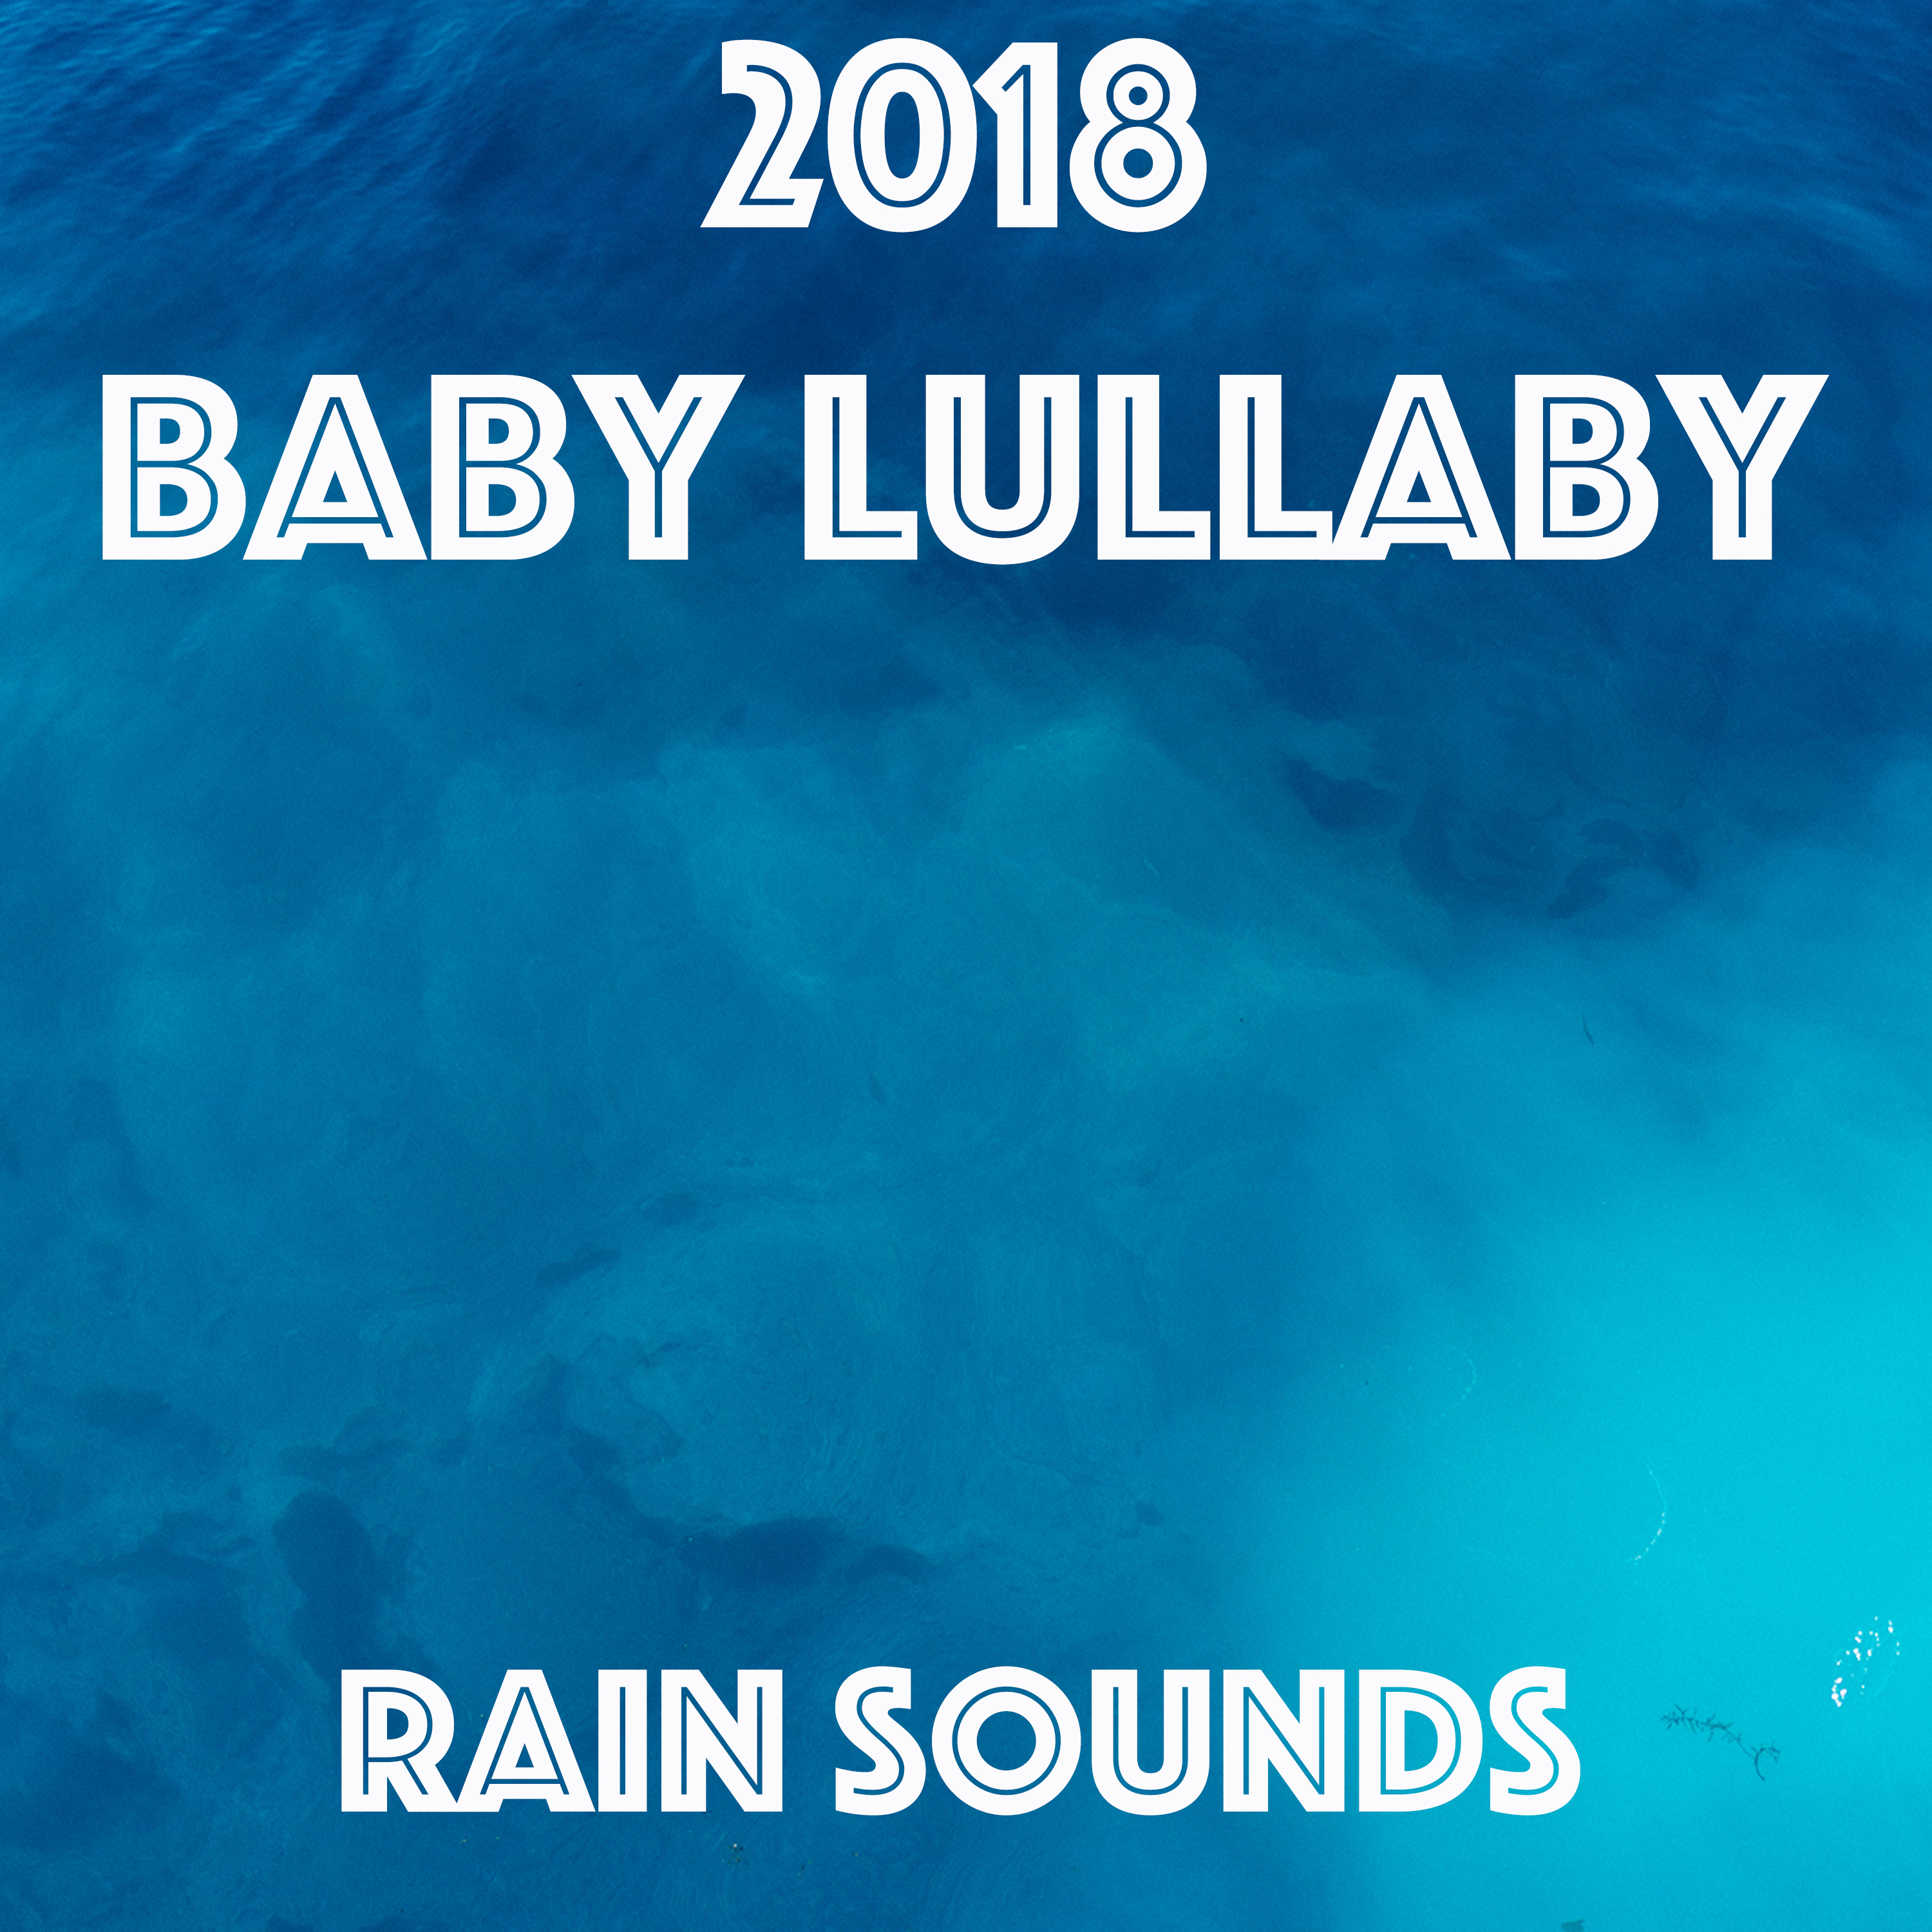 2018 Baby Lullaby Rain Sounds. Cure Sleepless Nights with Soothing Sounds of Natural Rain